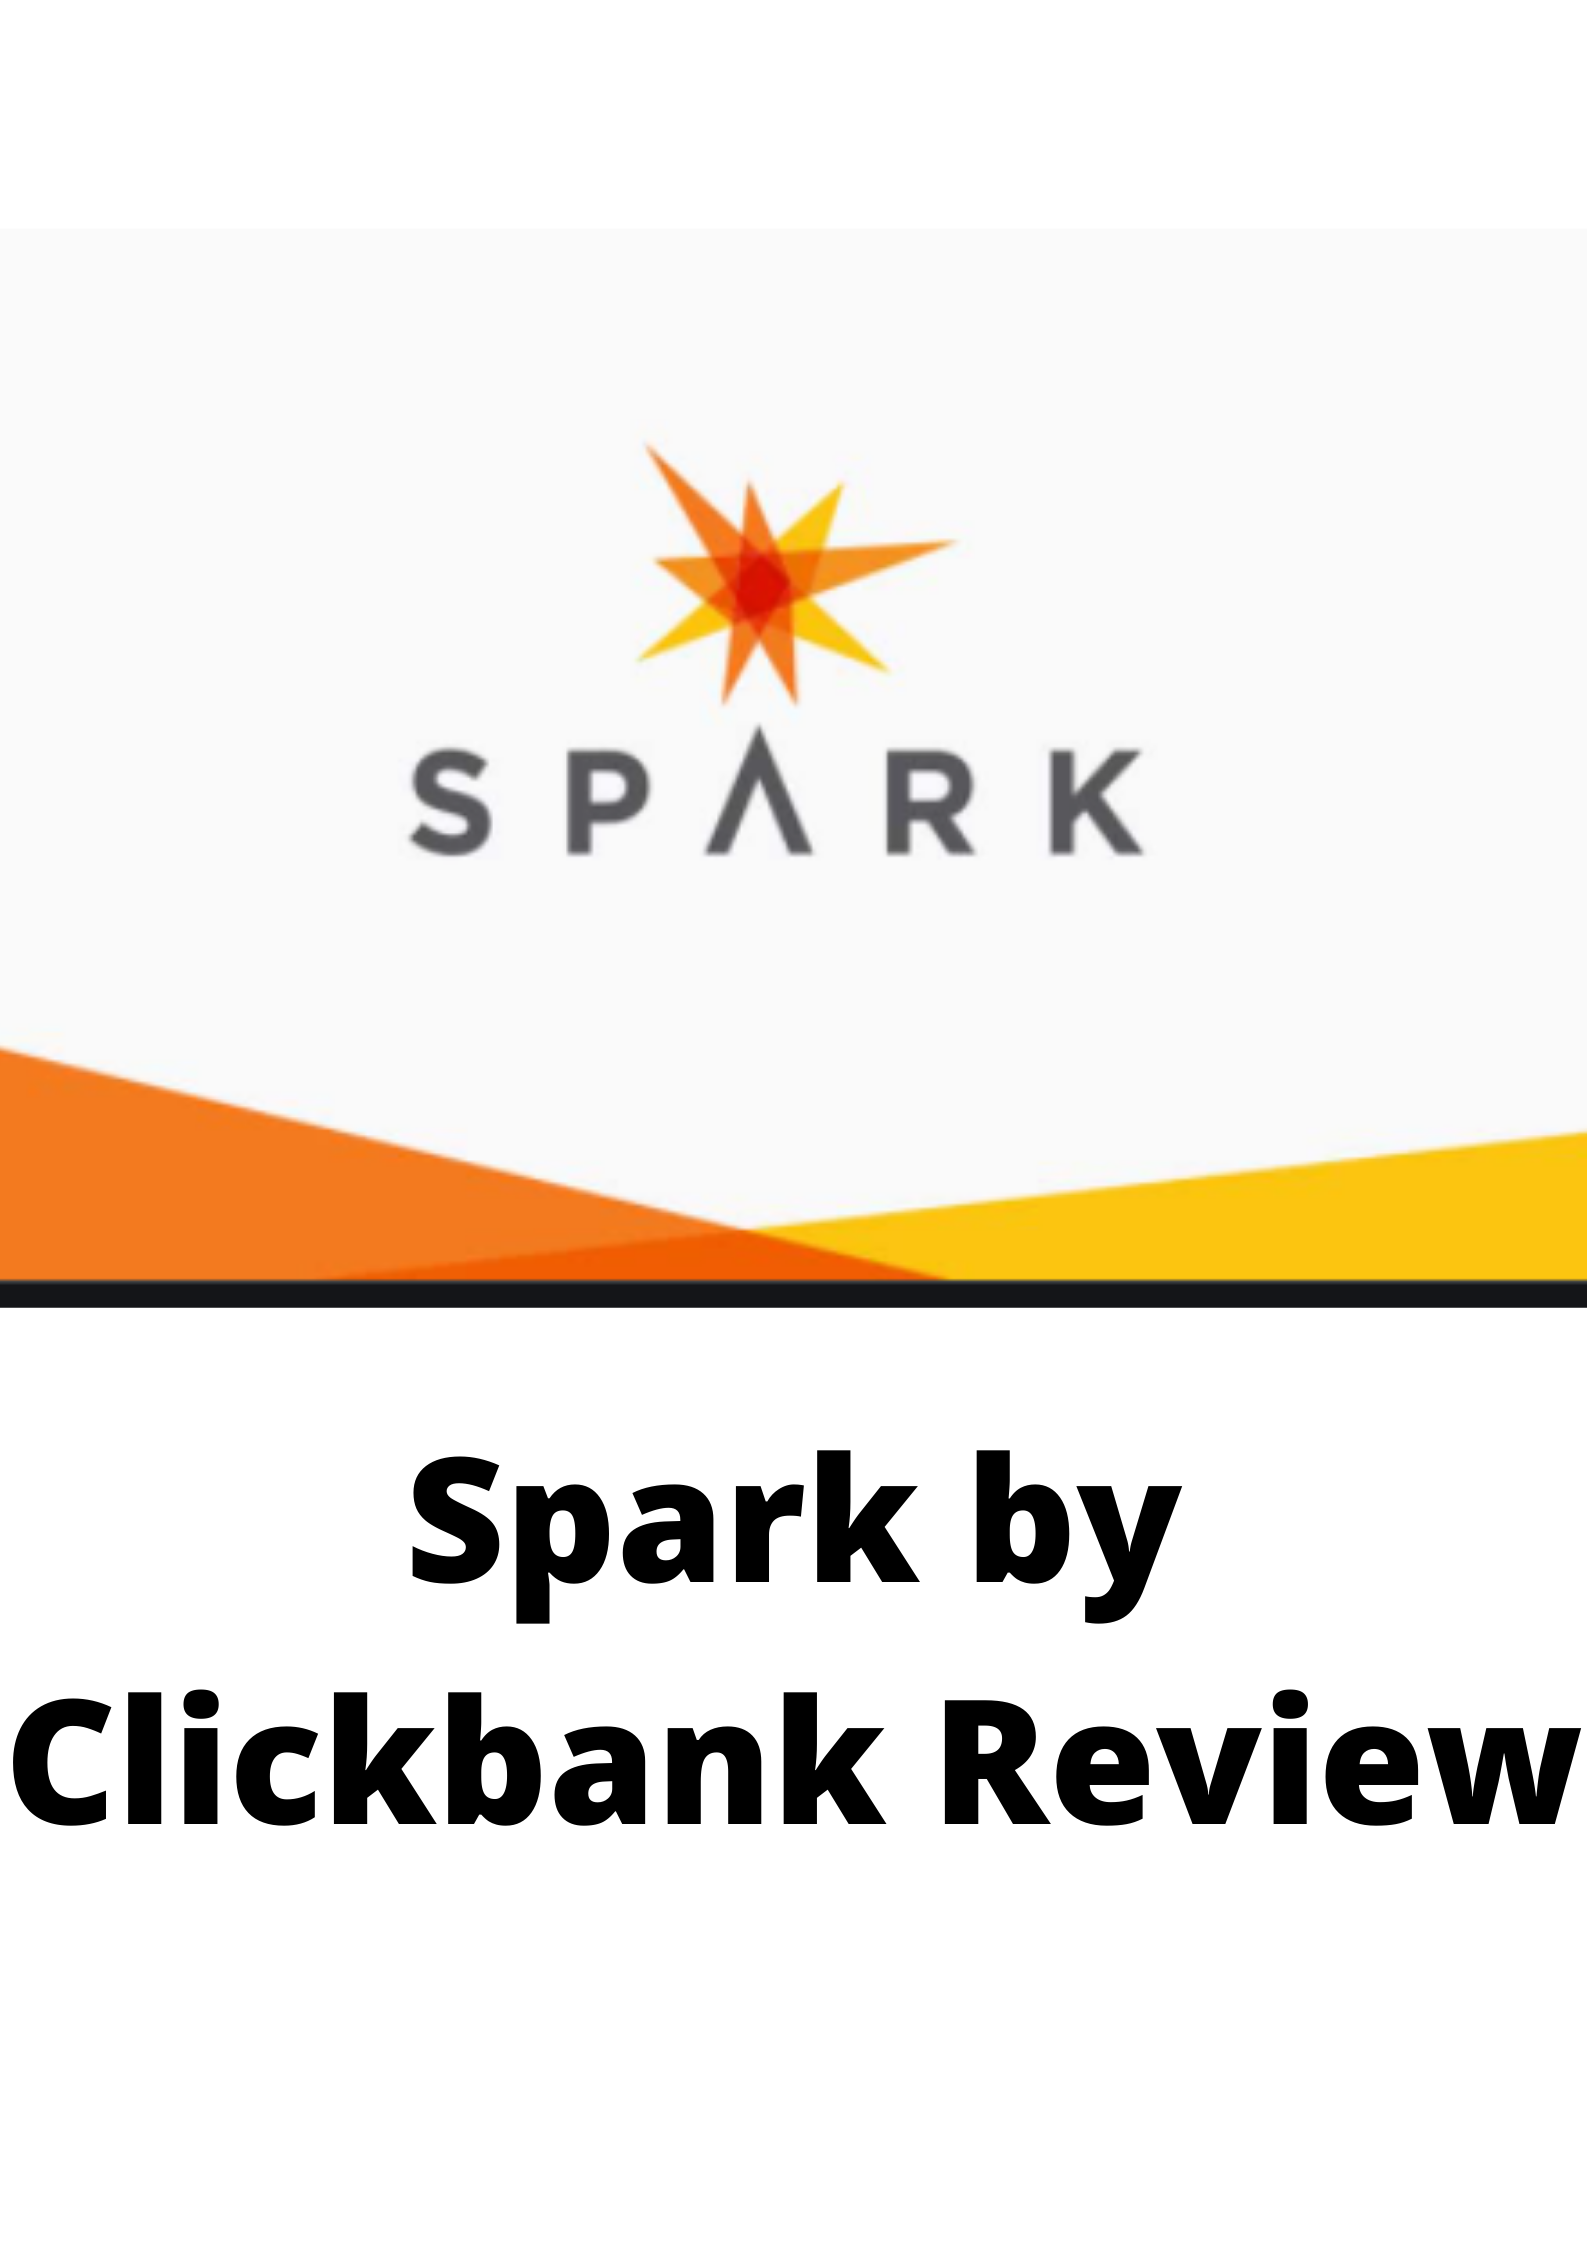 Spark by clickbank review